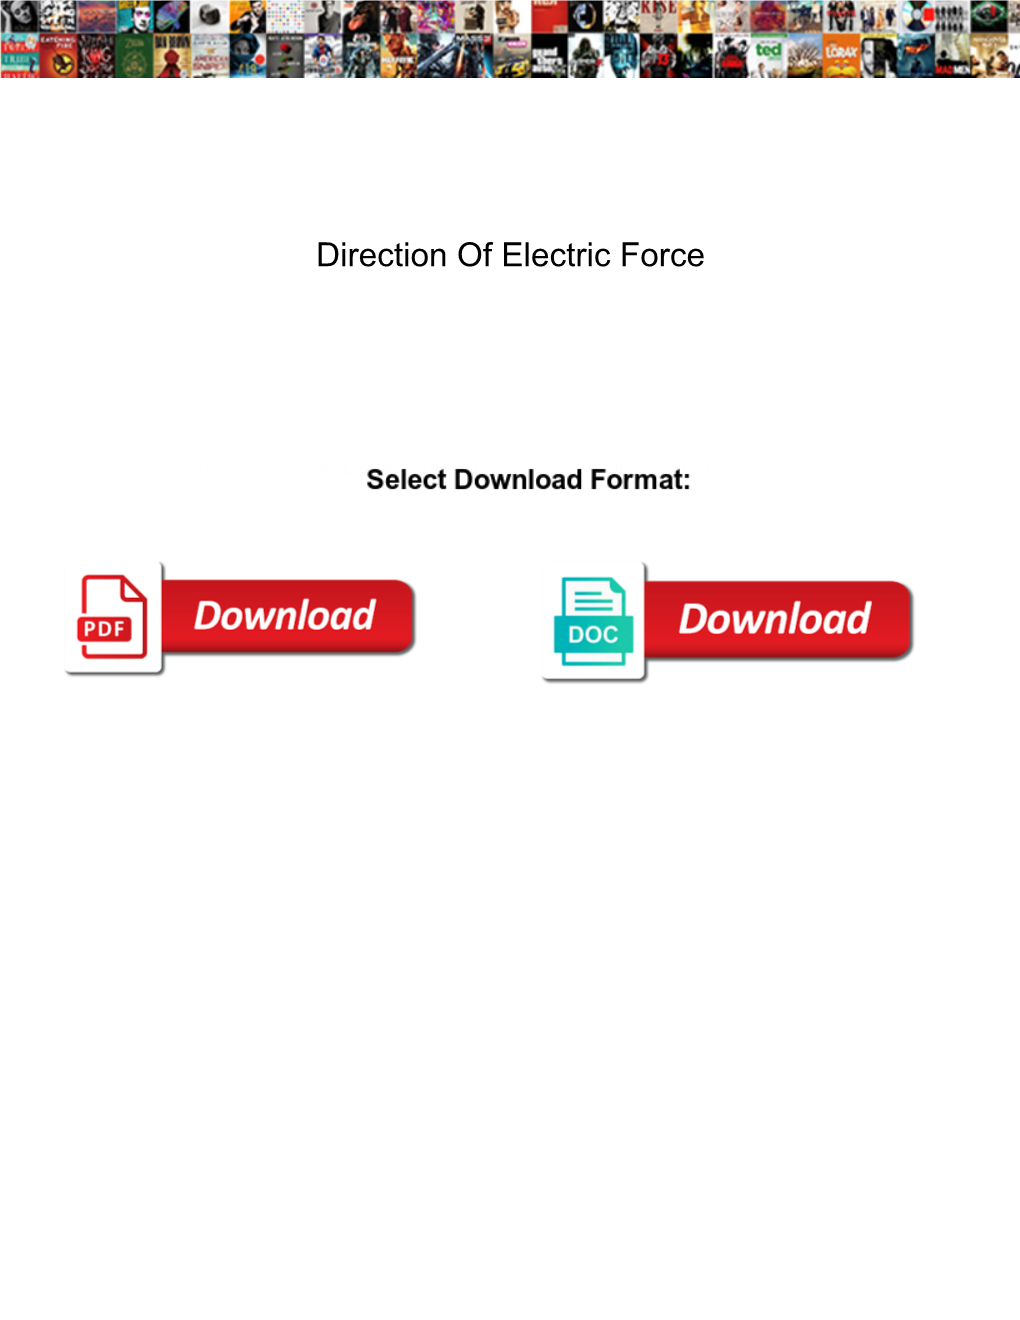 Direction of Electric Force